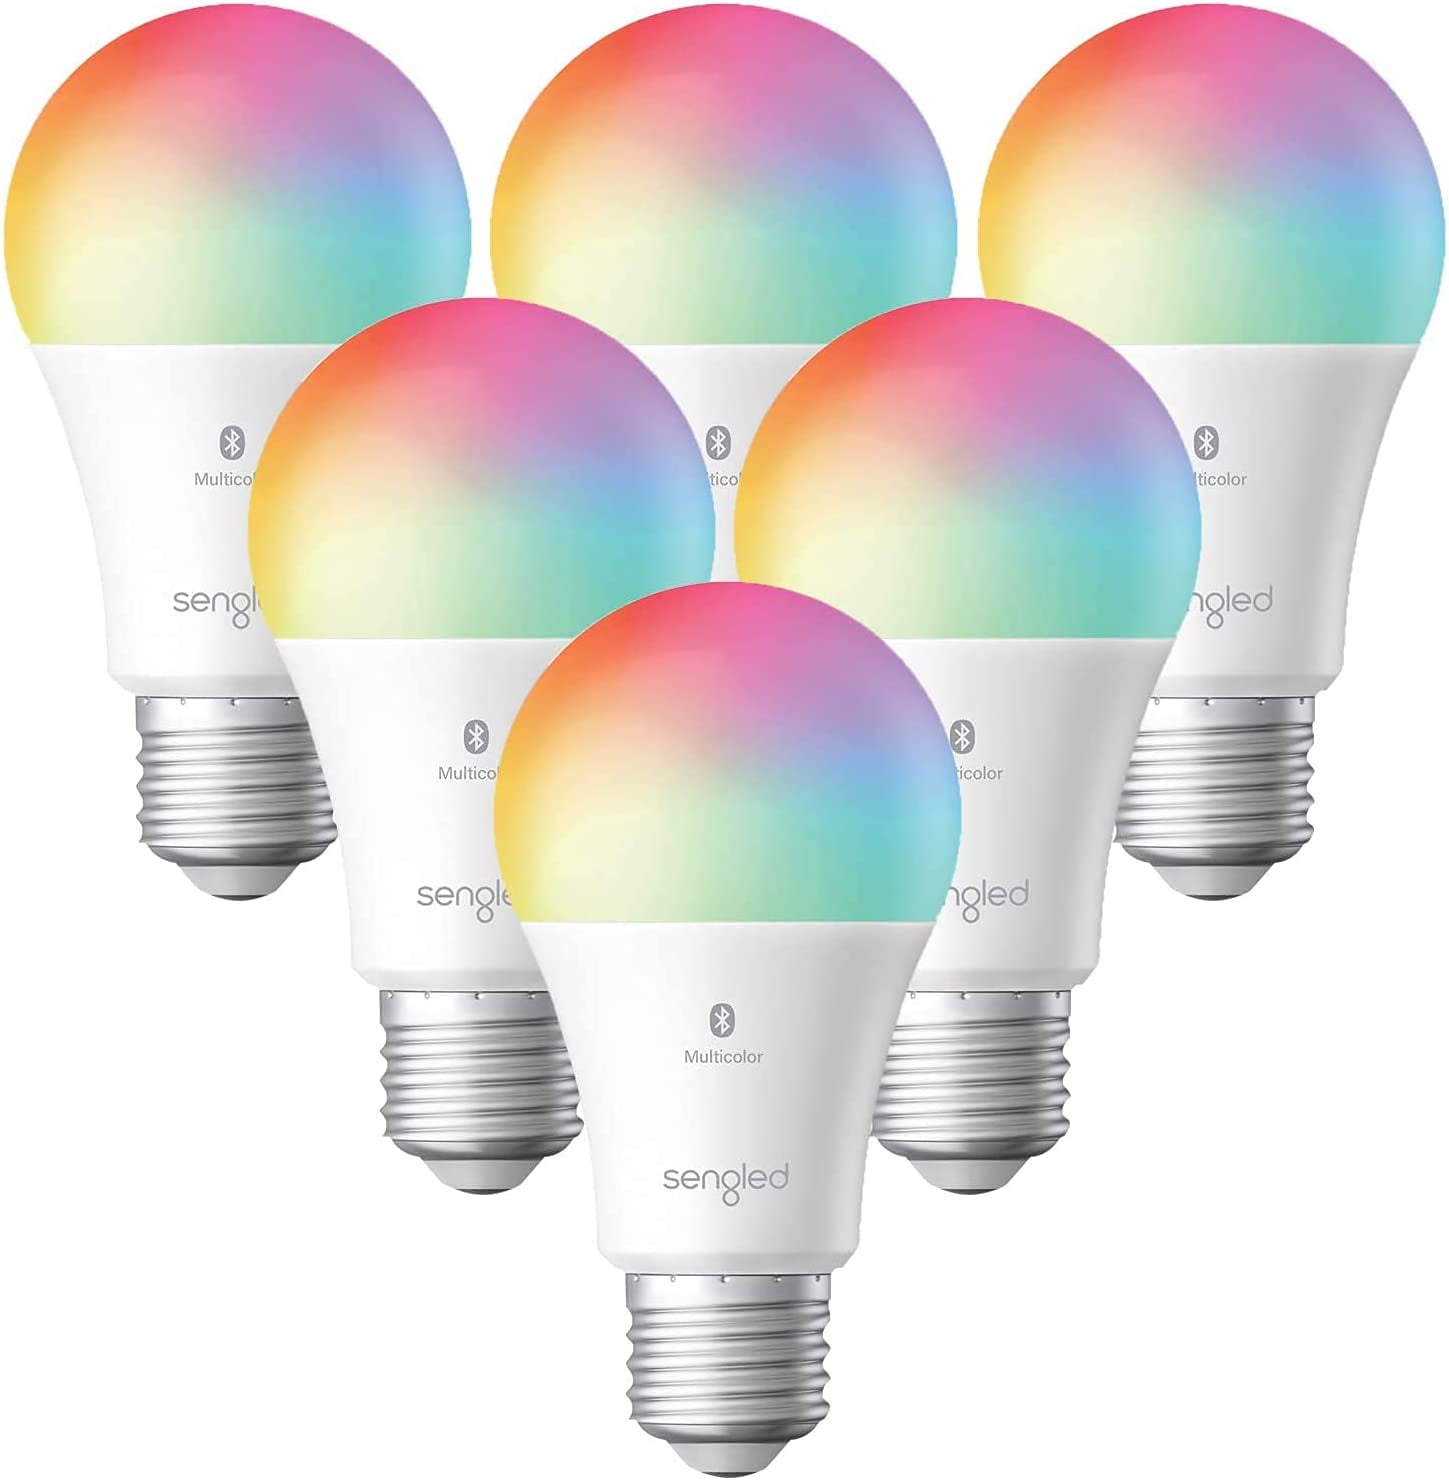 Smart Light Bulbs, Color Changing Light Bulb Bluetooth Dimmable LED Bulb A19 E26 Multicolor, High CRI, High Brightness, 9W 800LM, 6-Pack, No Hub Required - Walmart.com